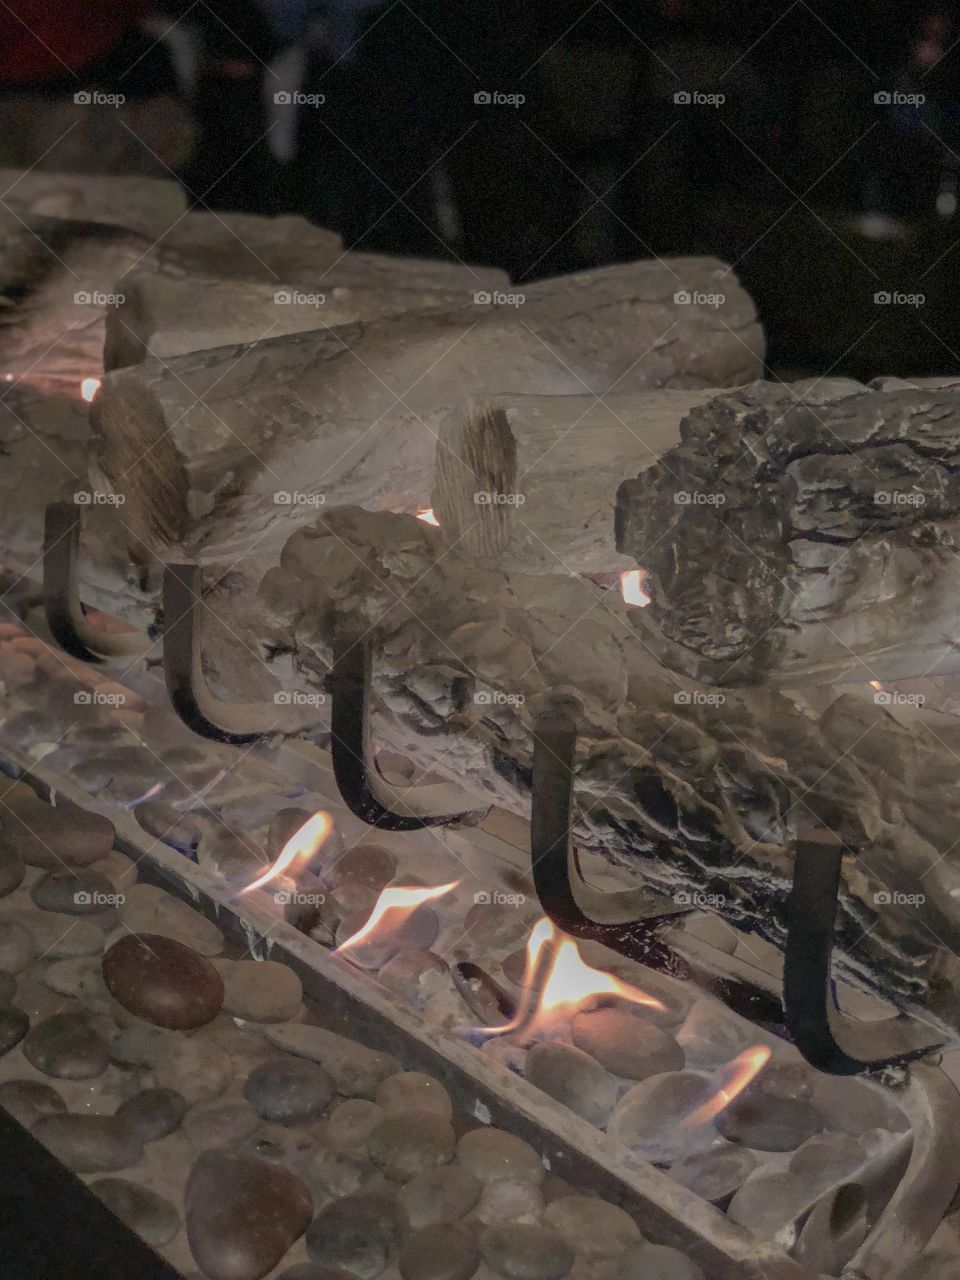 Fireplace lit with firewoods and stones